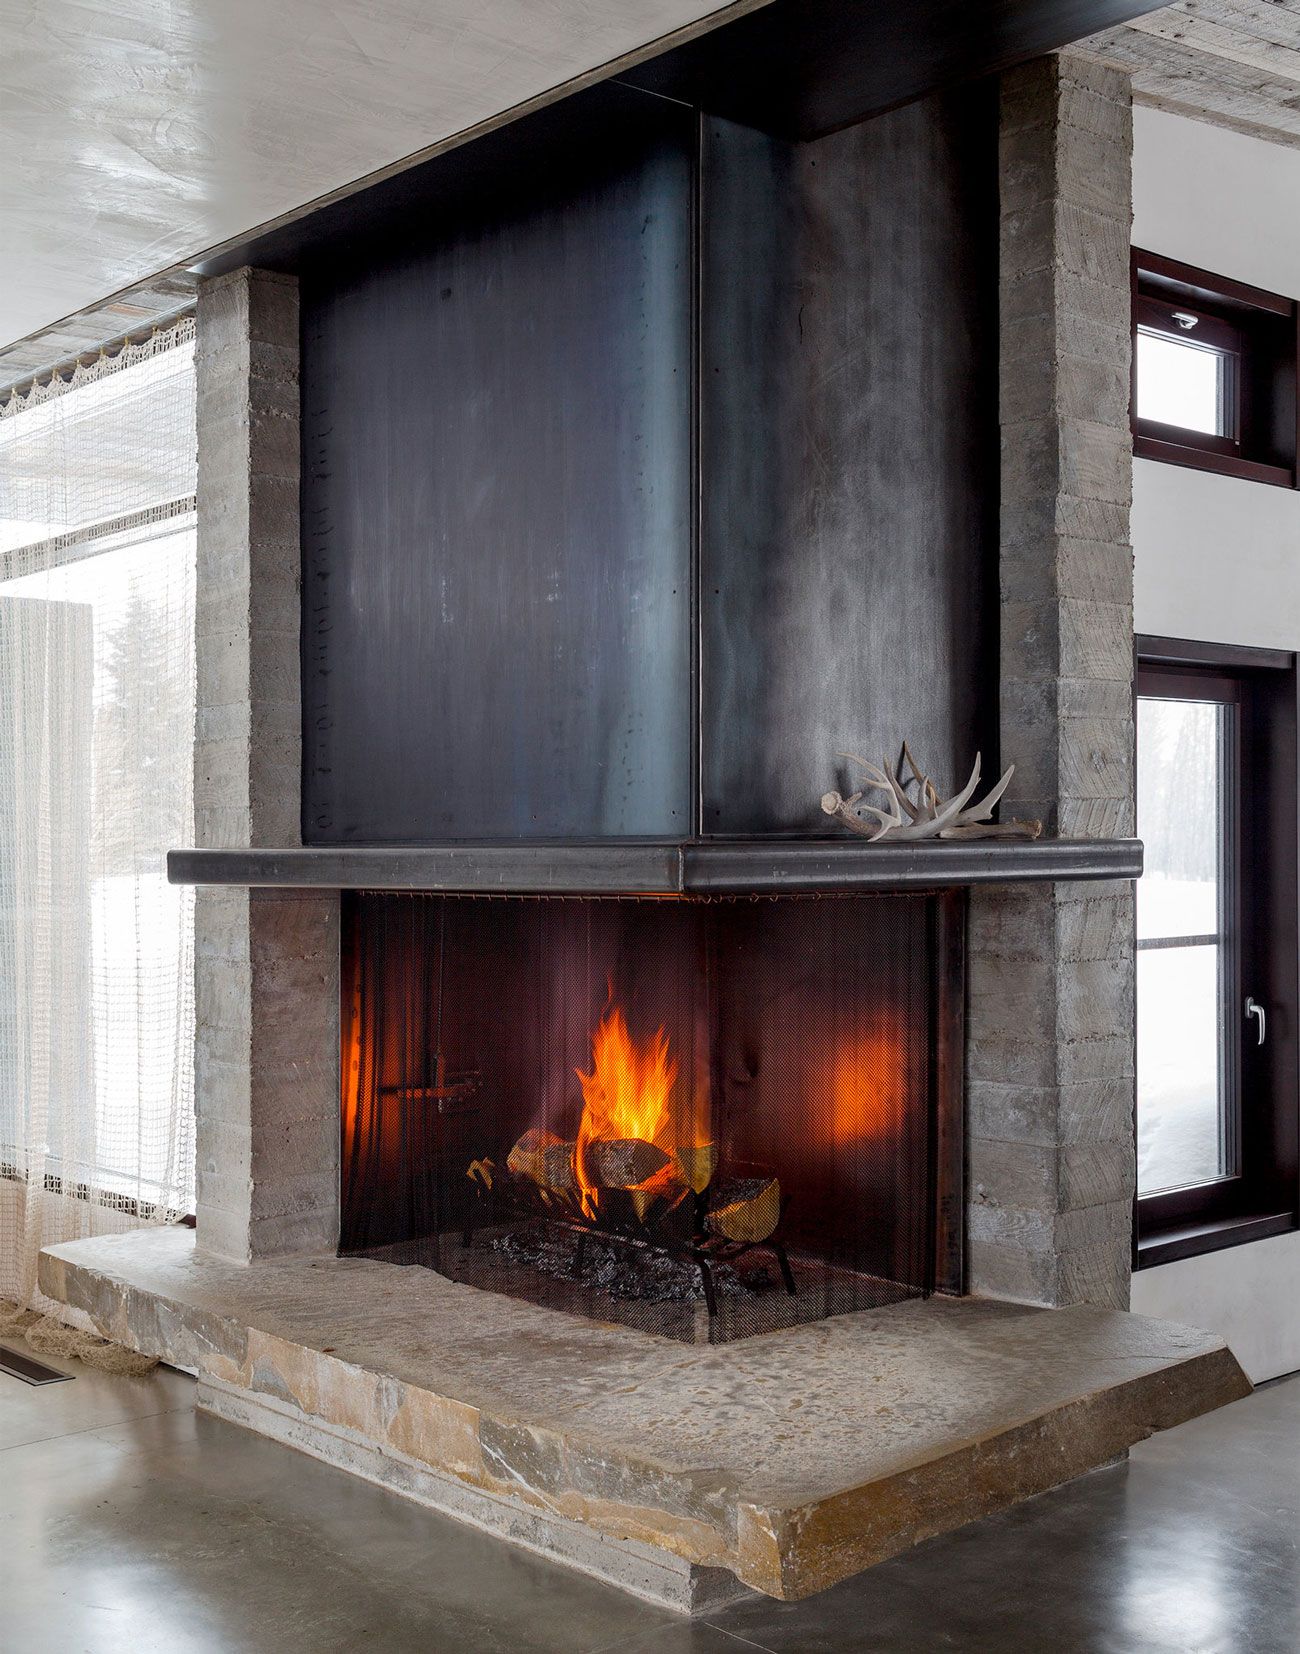 Fireplaces Utah New Jh Modern by Pearson Design Group